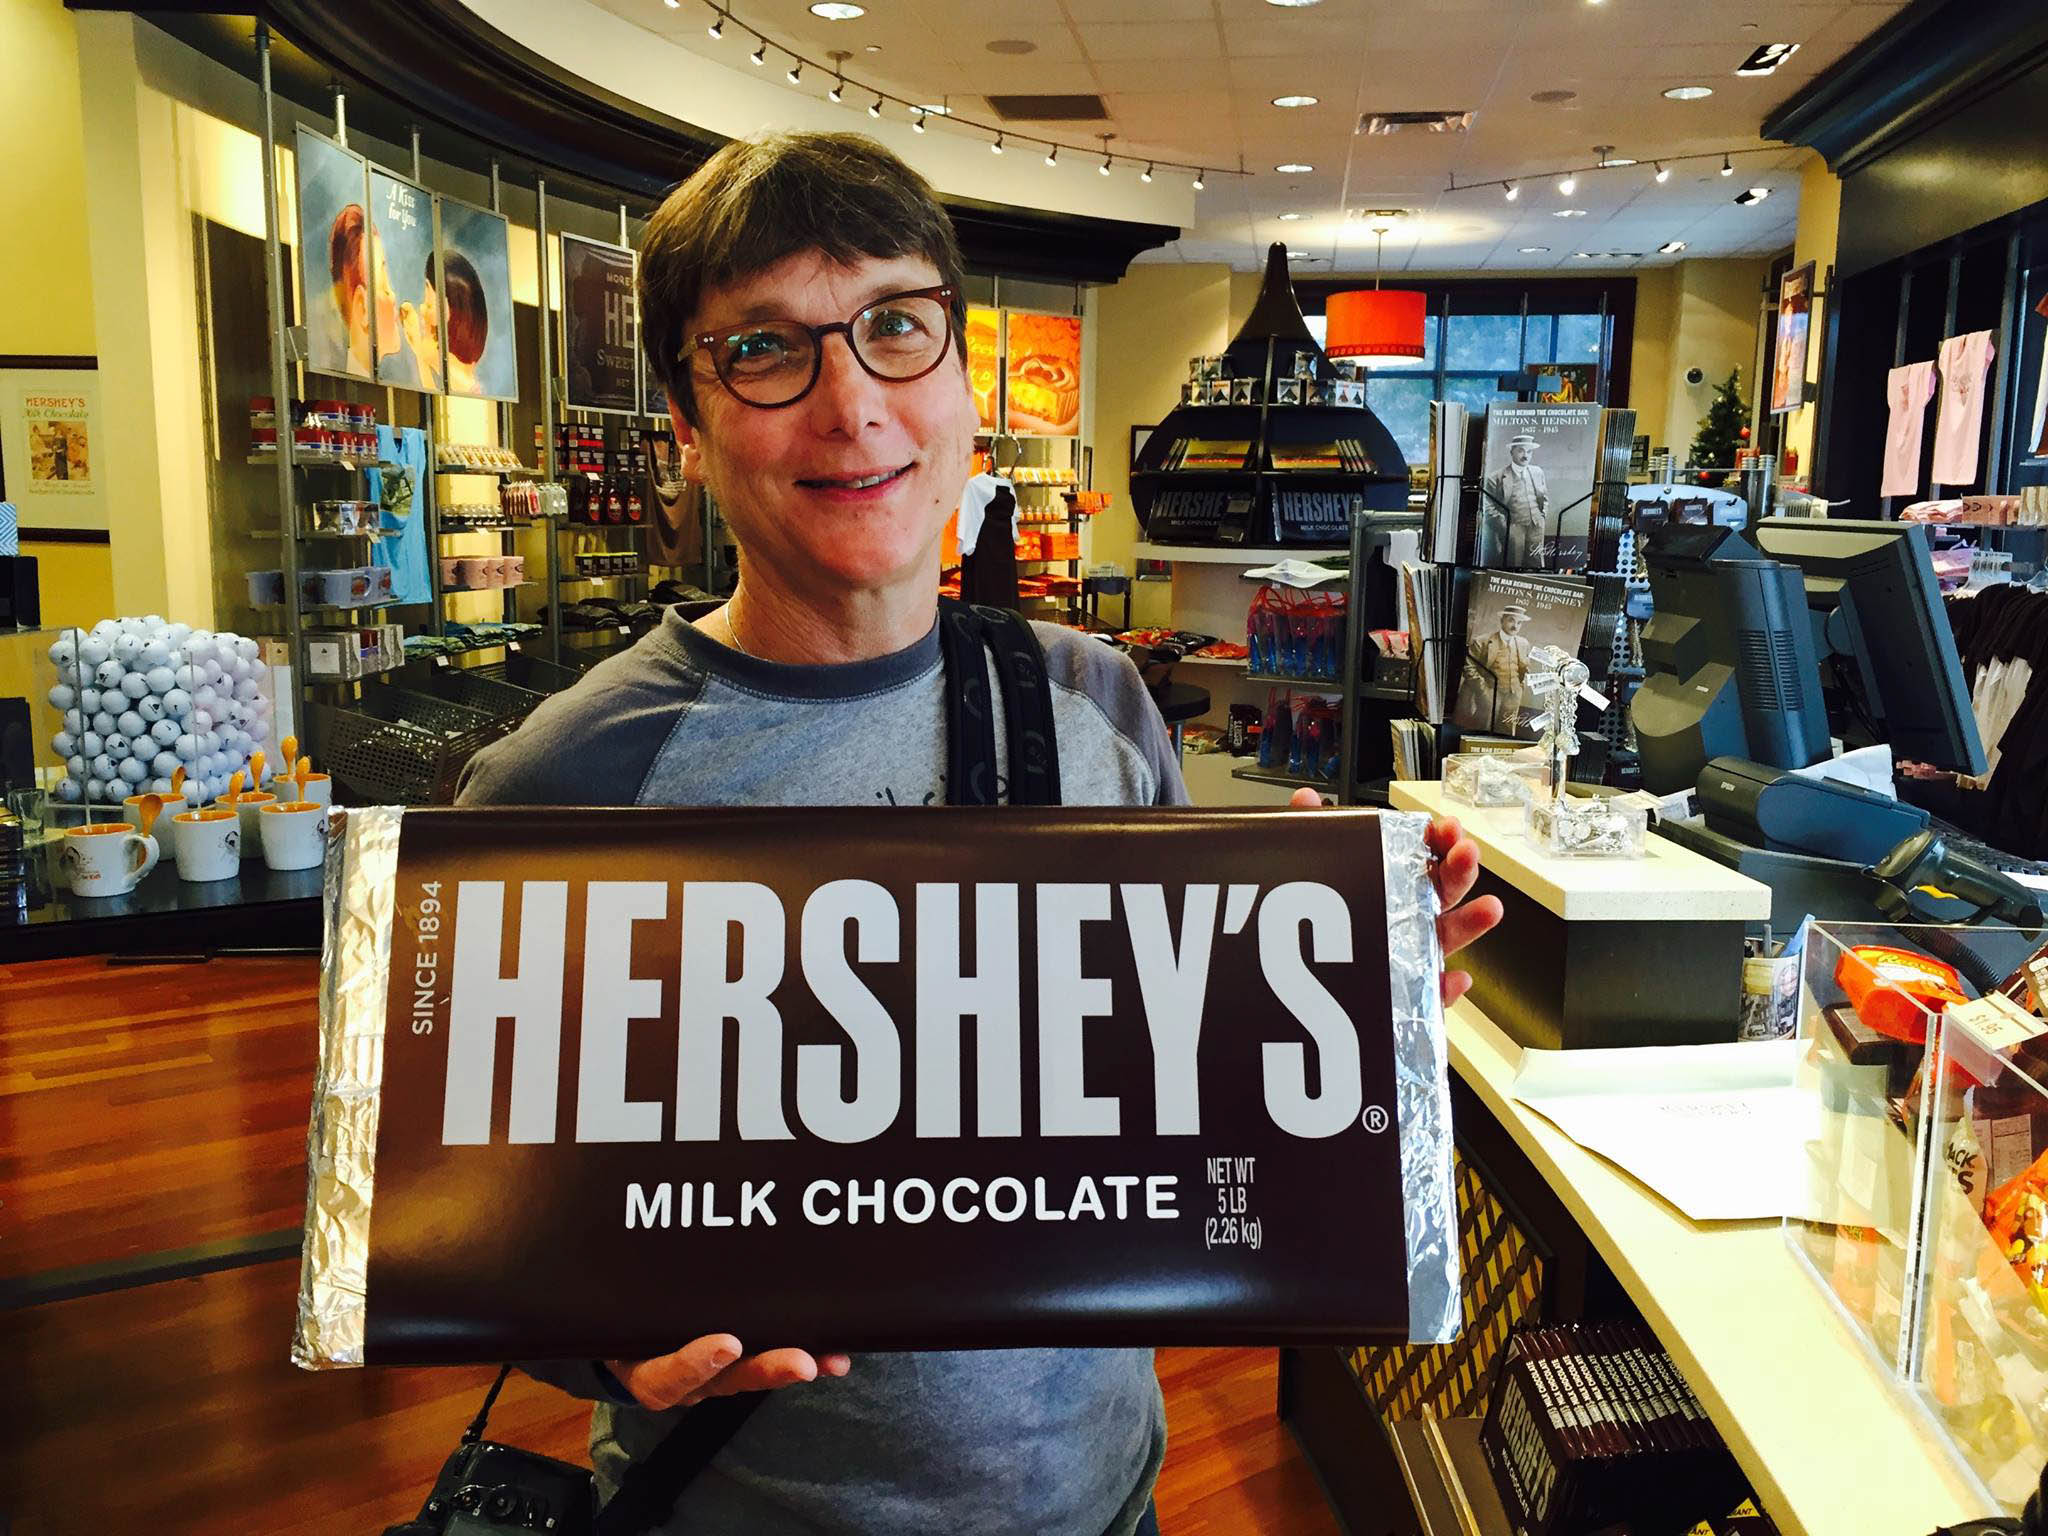 A giant Hershey bar in the gift shop.